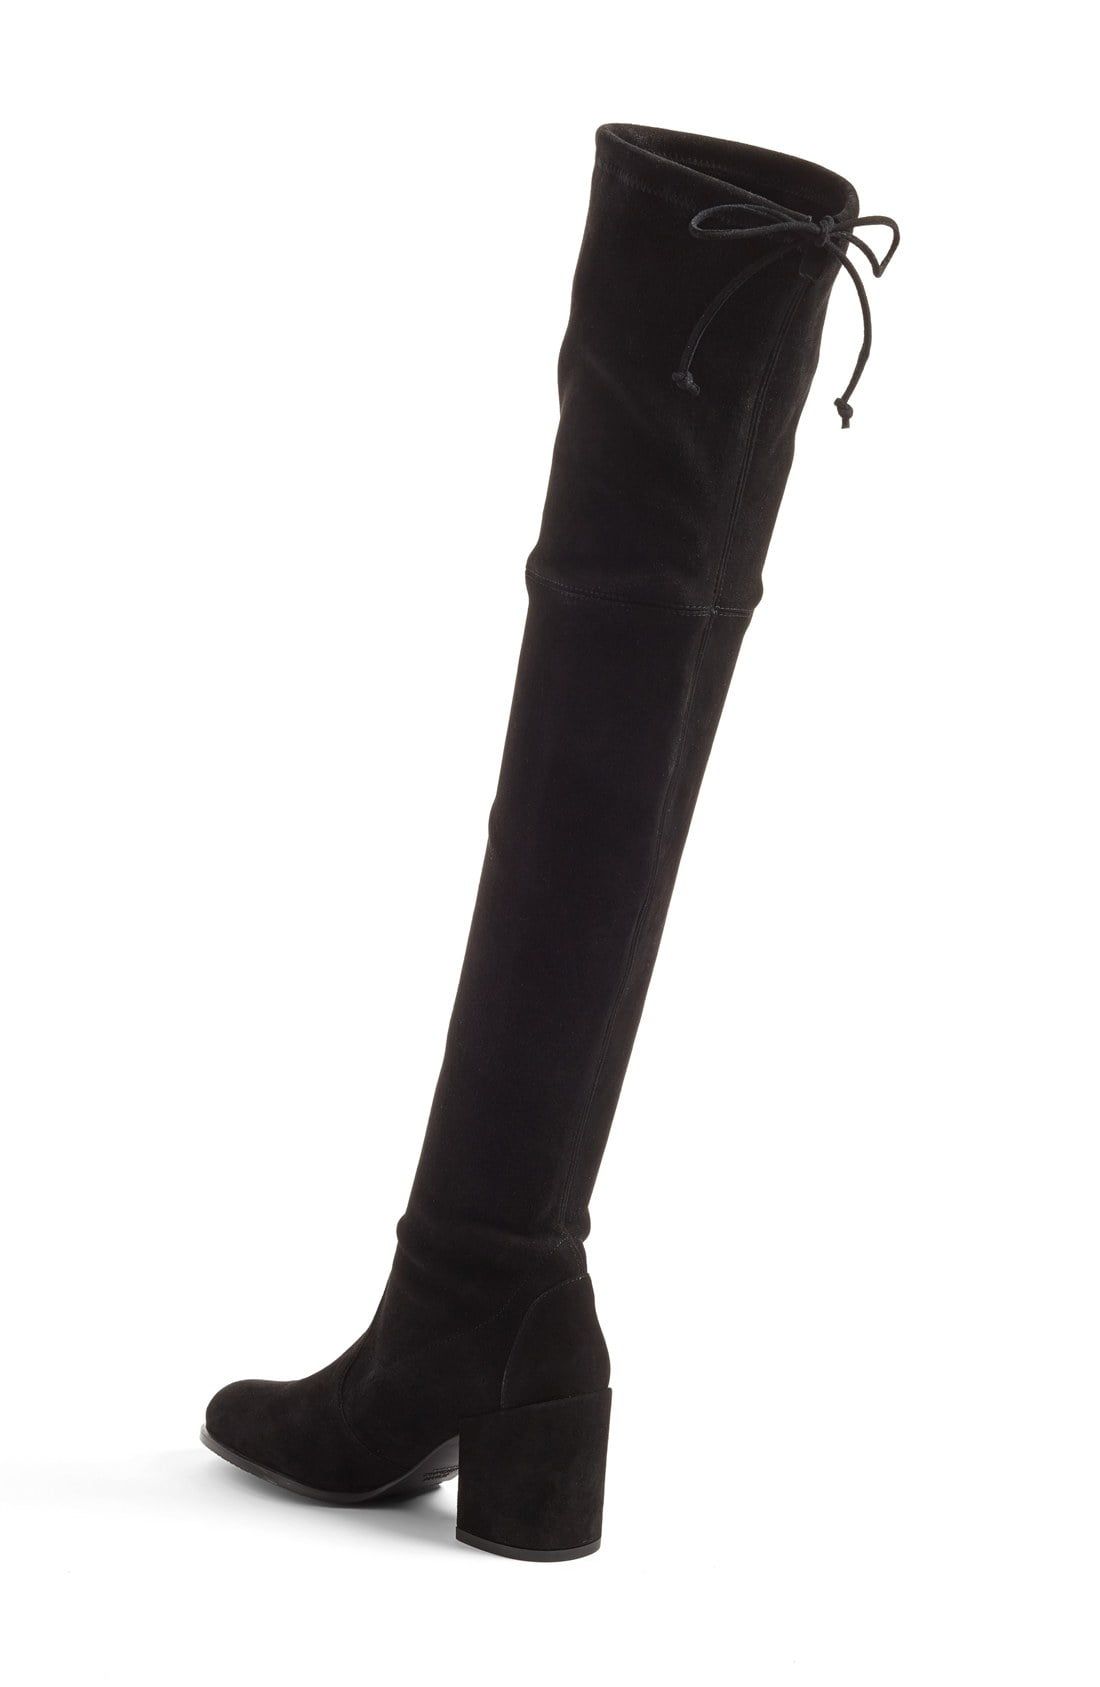 Tieland Over the Knee Boot